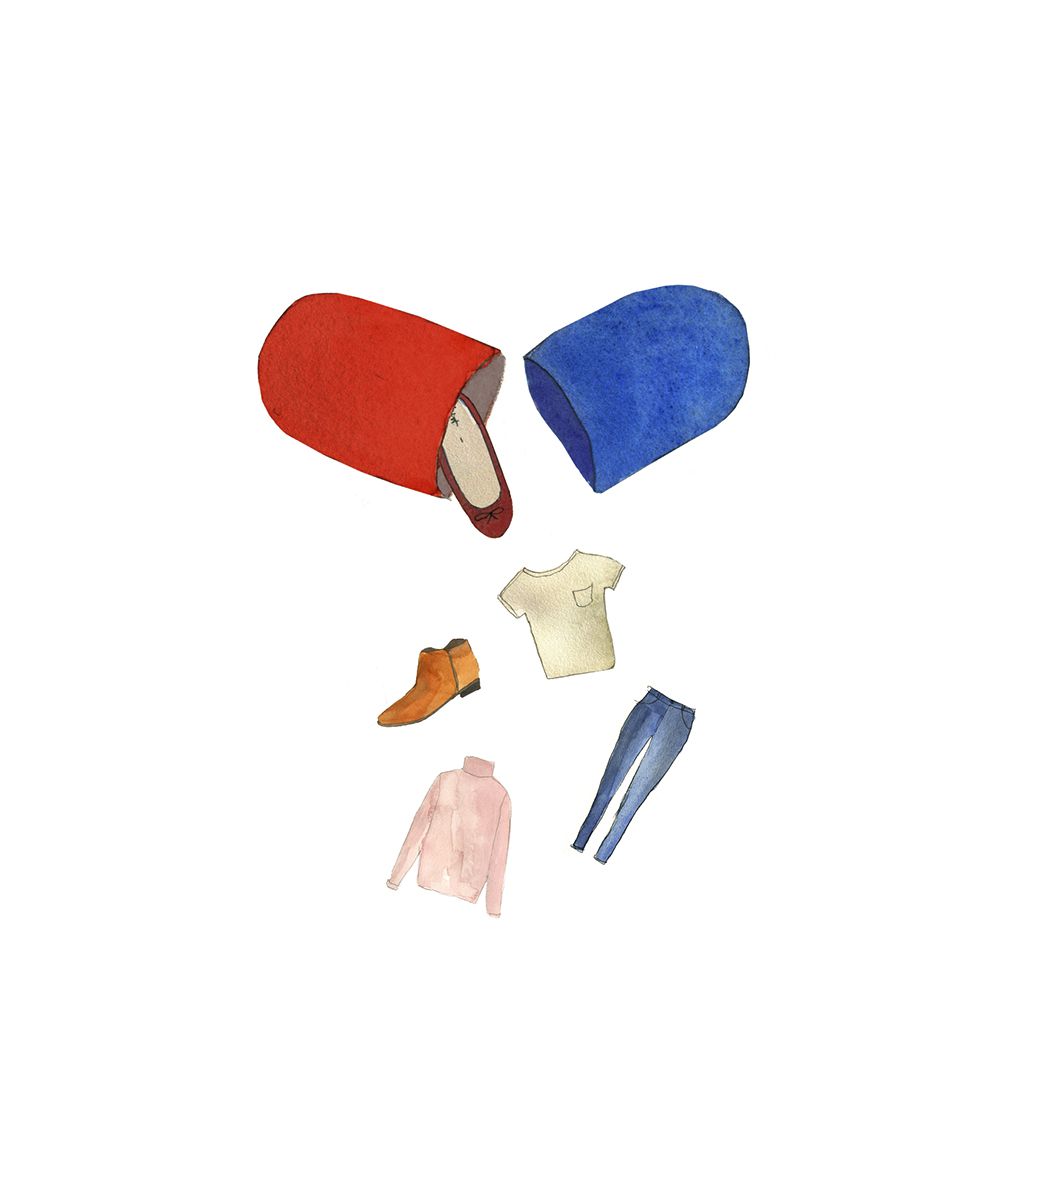 Illustration: Capsule full of clothes and shoes